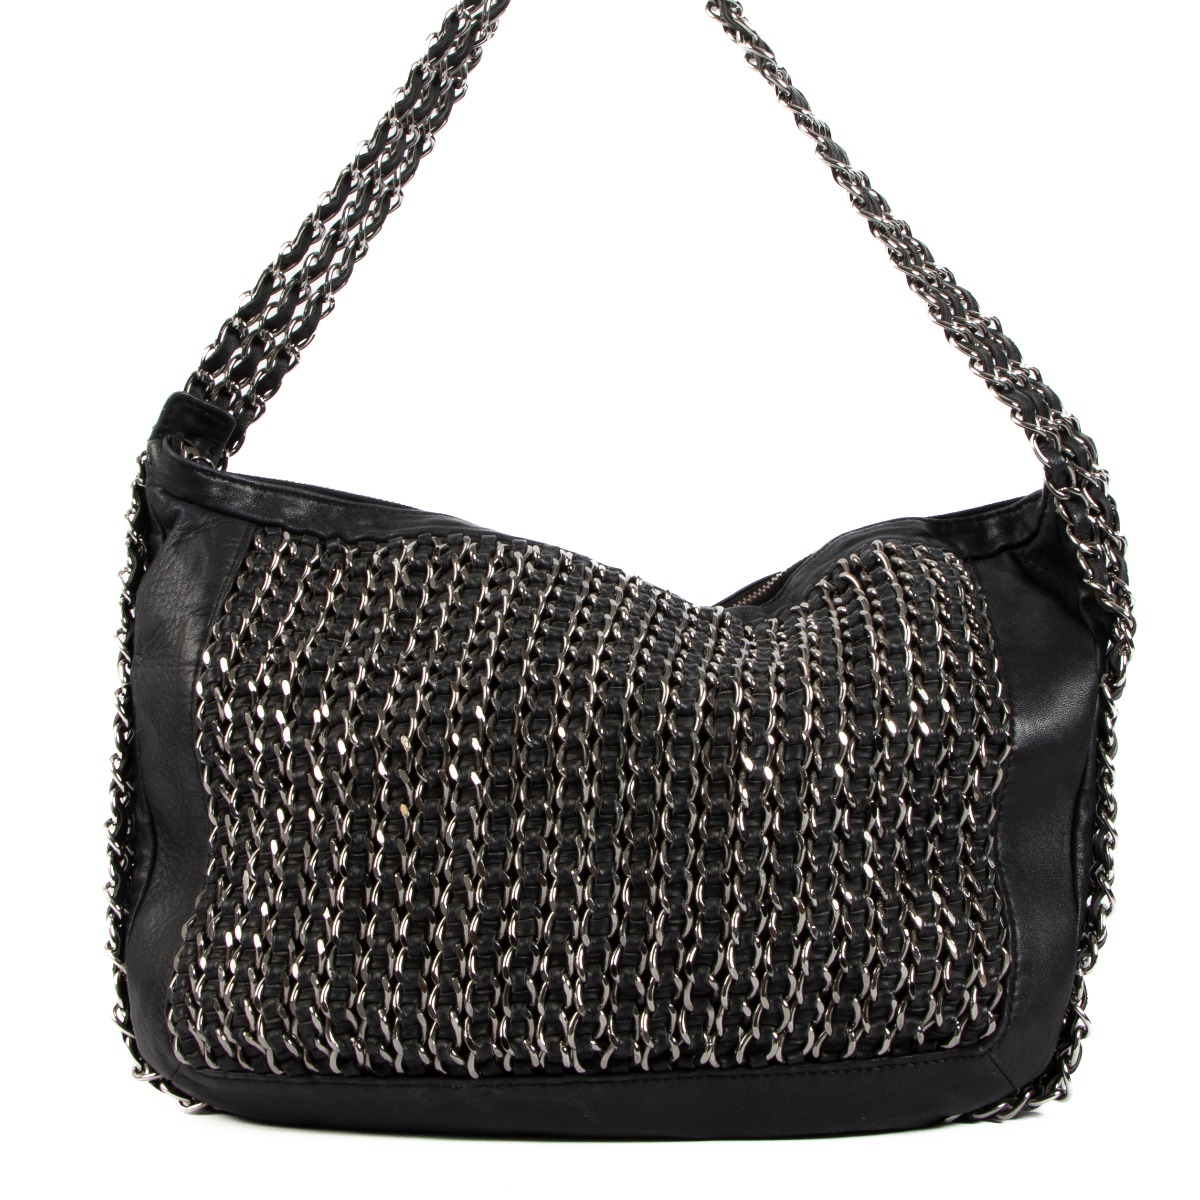 Chanel Black Woven Braided Leather CC Silver Chain Tote, 52% OFF